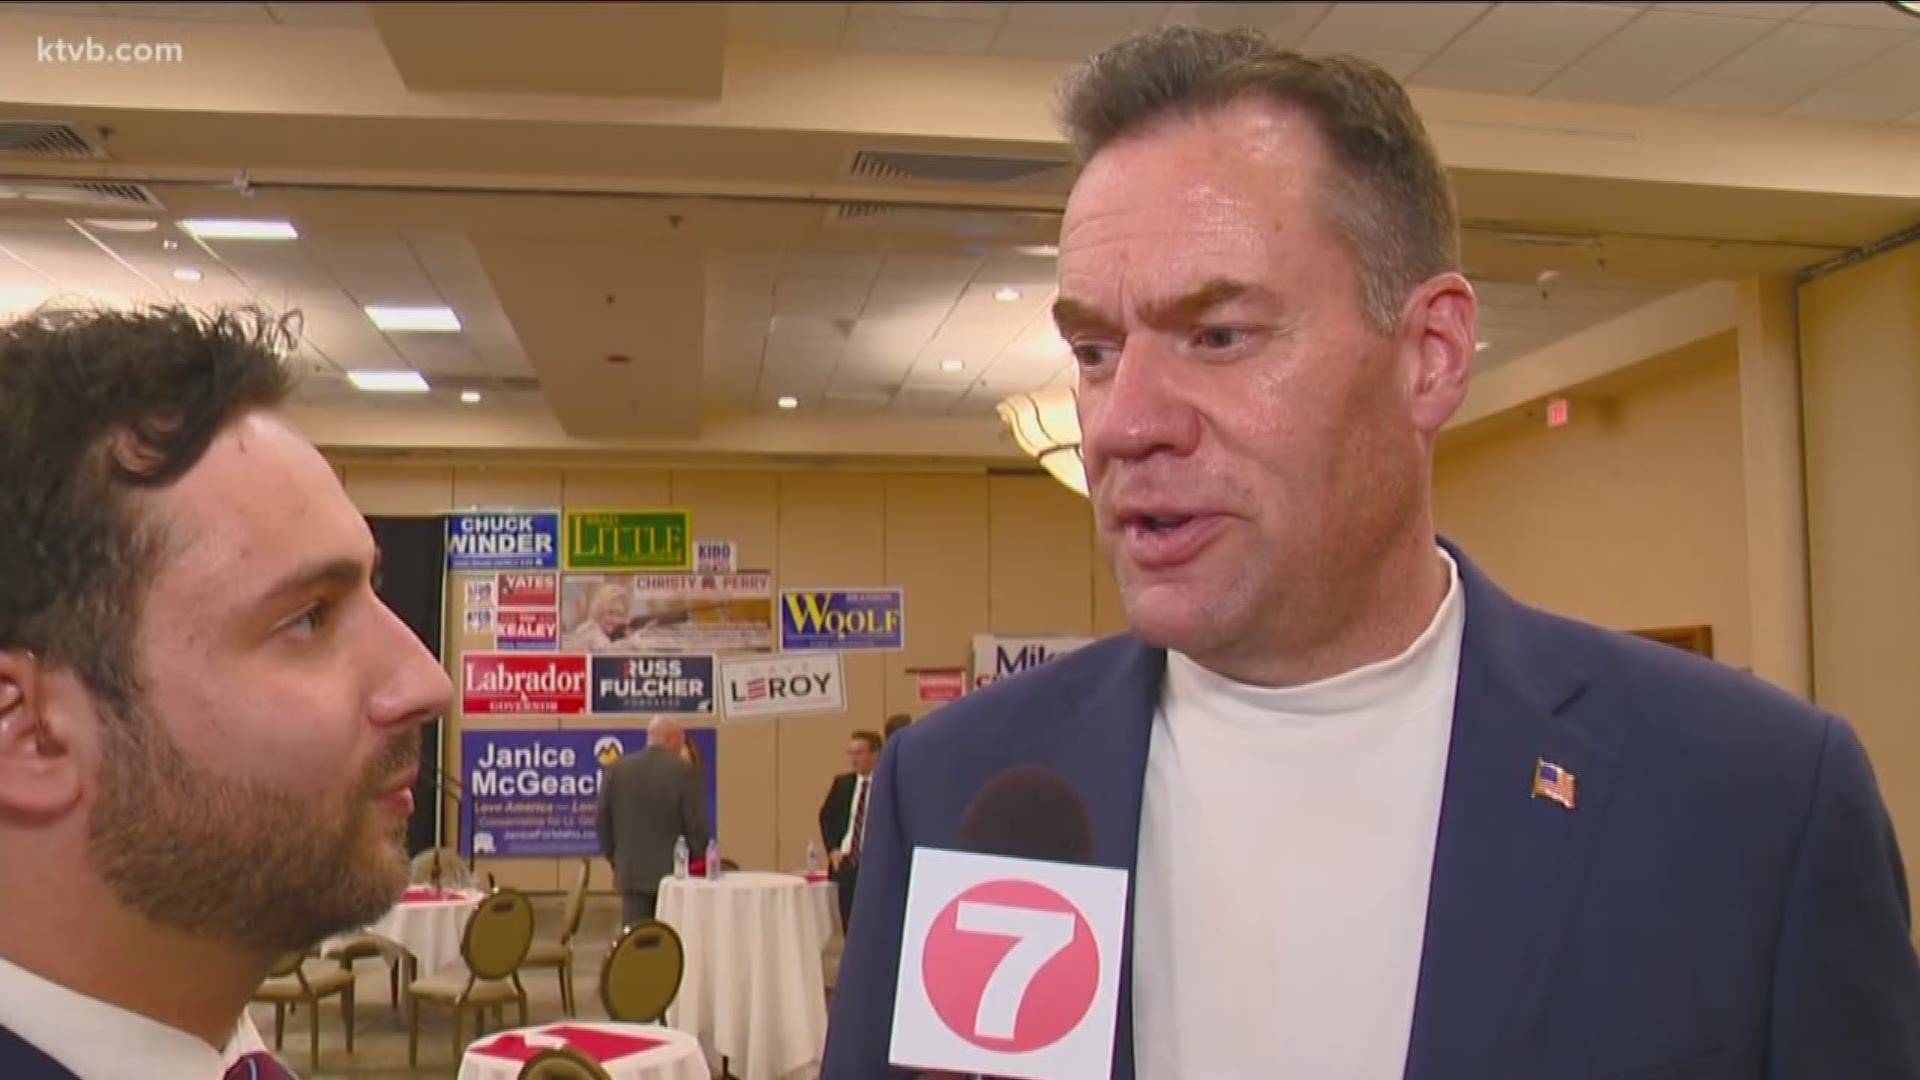 Russ Fulcher reflects on winning GOP primary for Idaho's 1st Congressional District